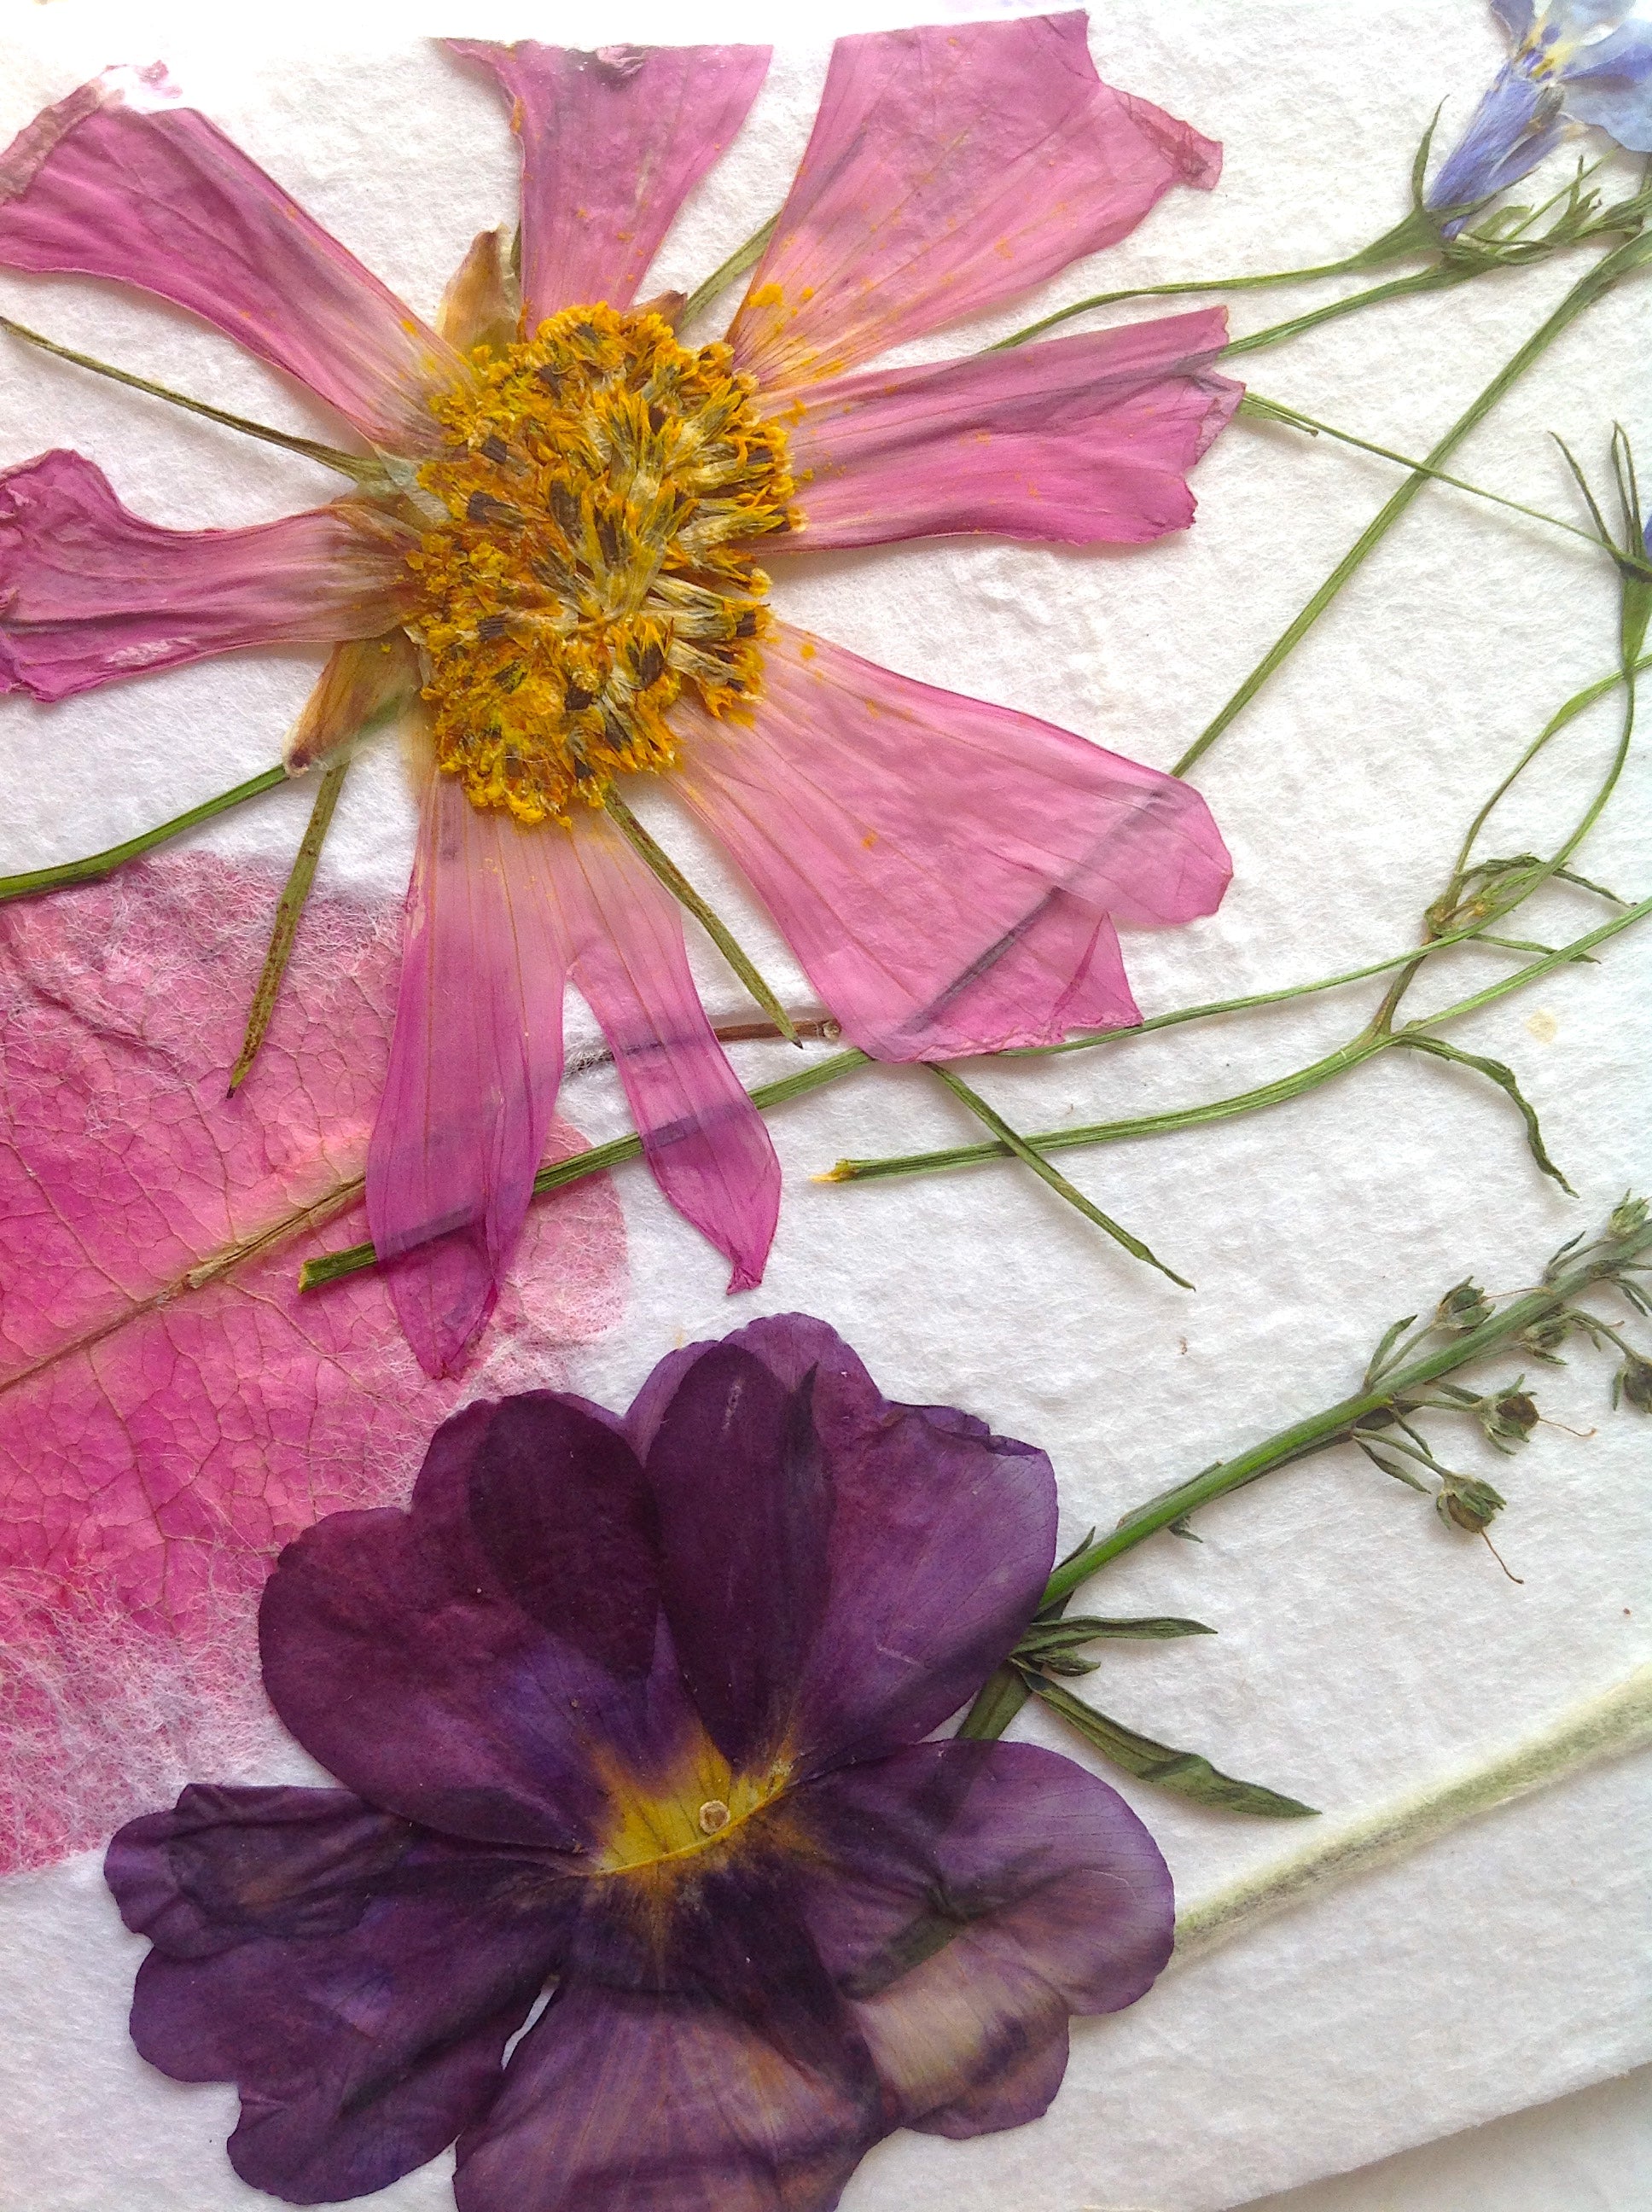 Pressed Flower Greeting Cards - Hand made